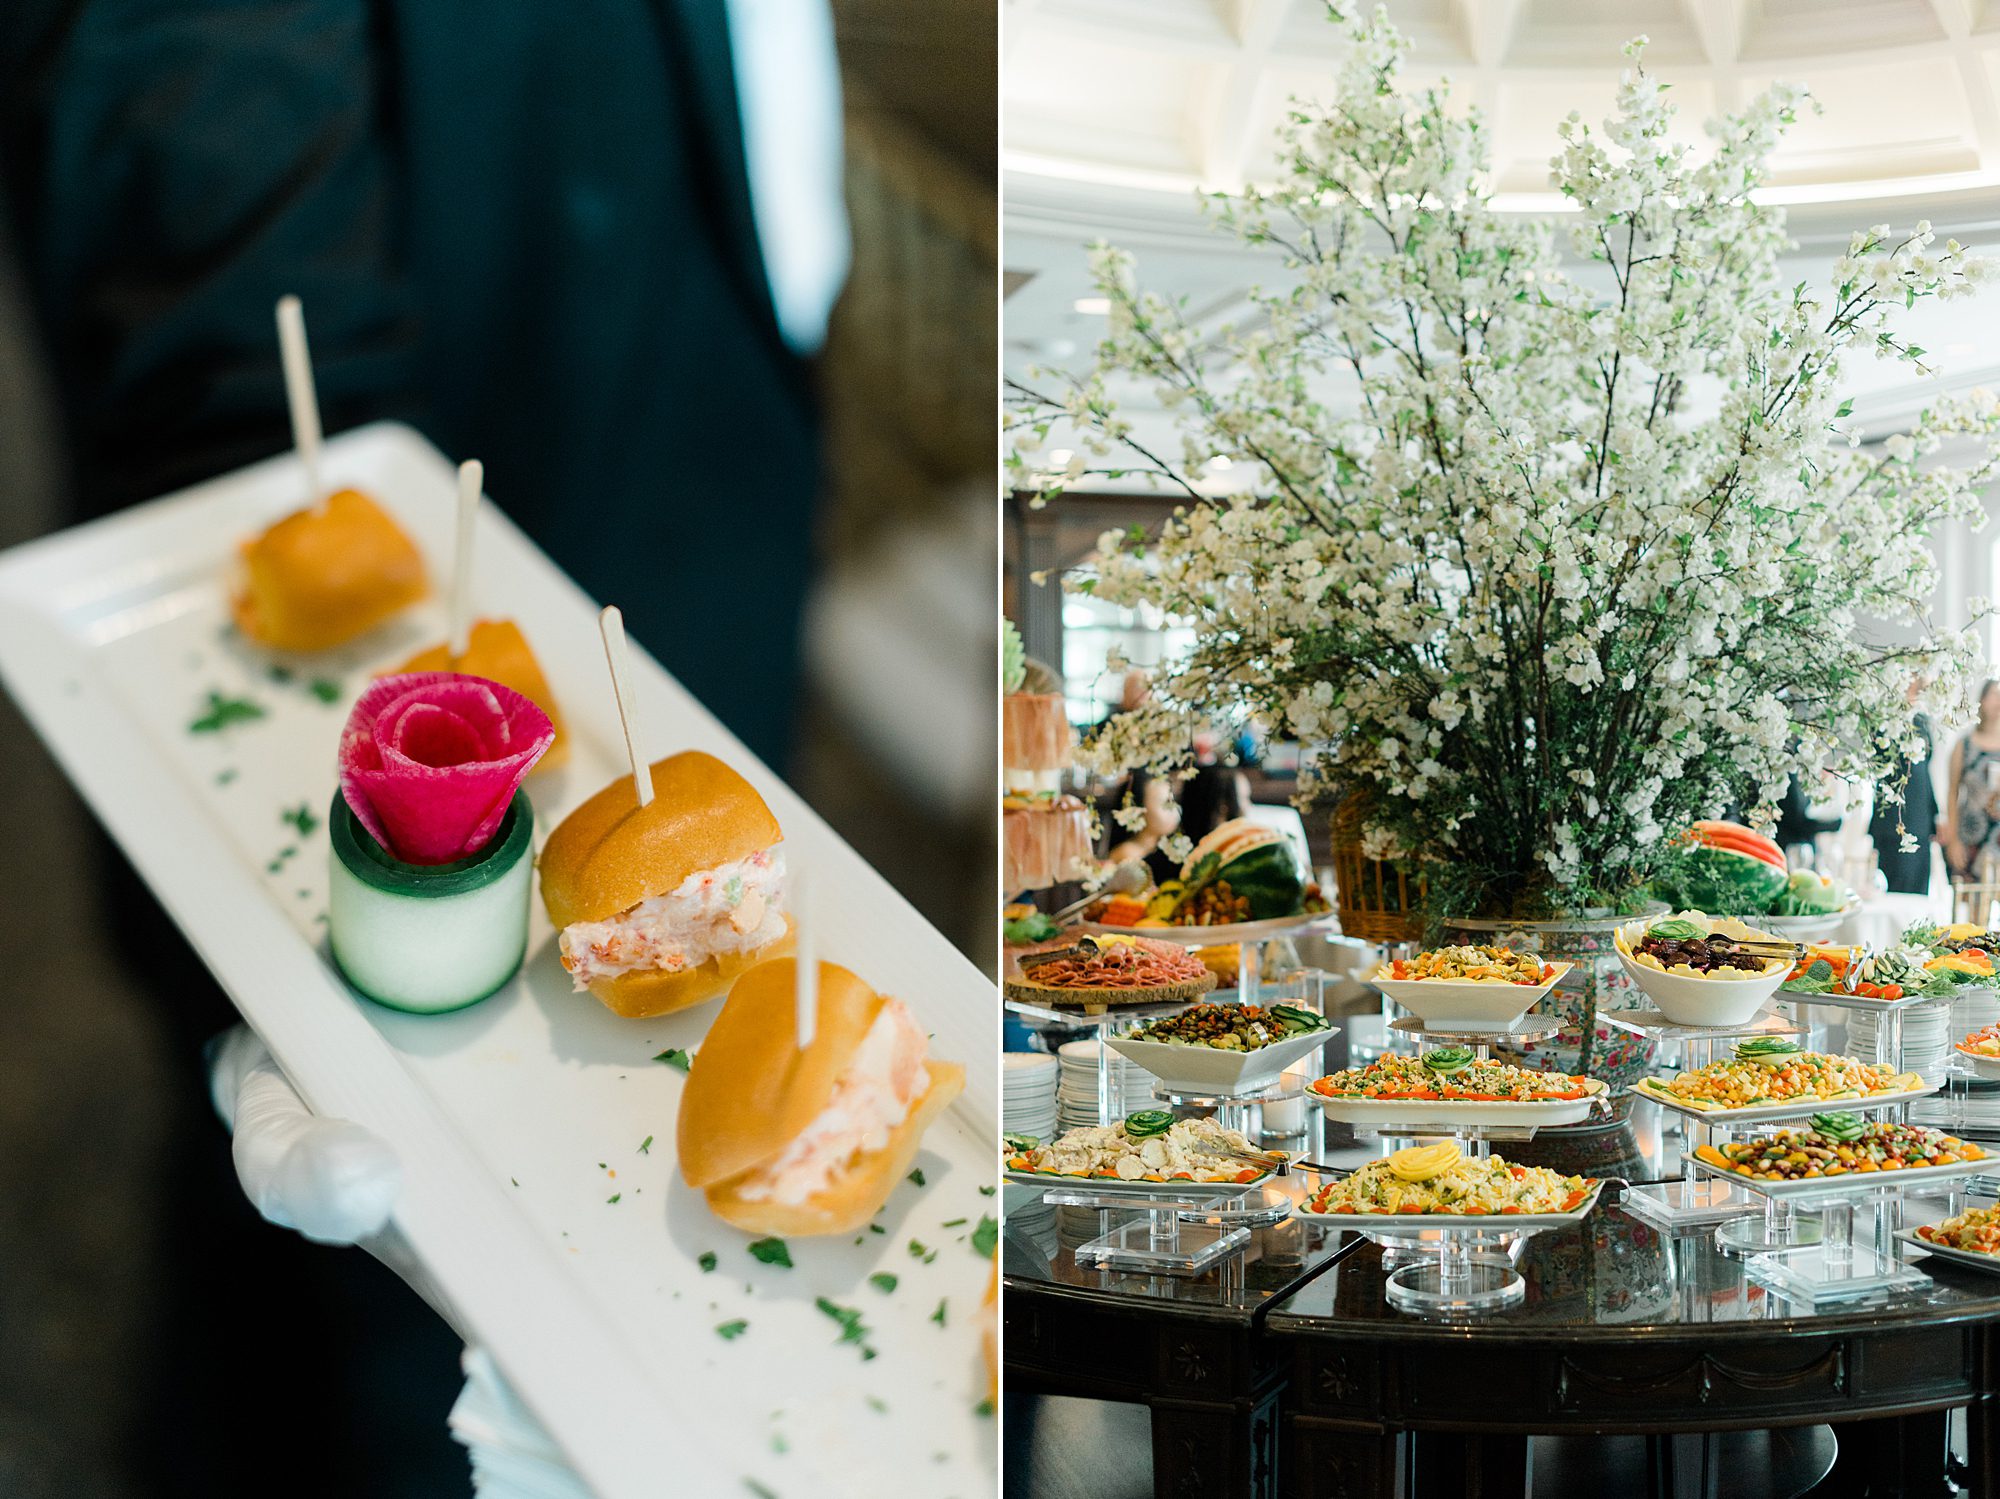 appetizers and food at wedding